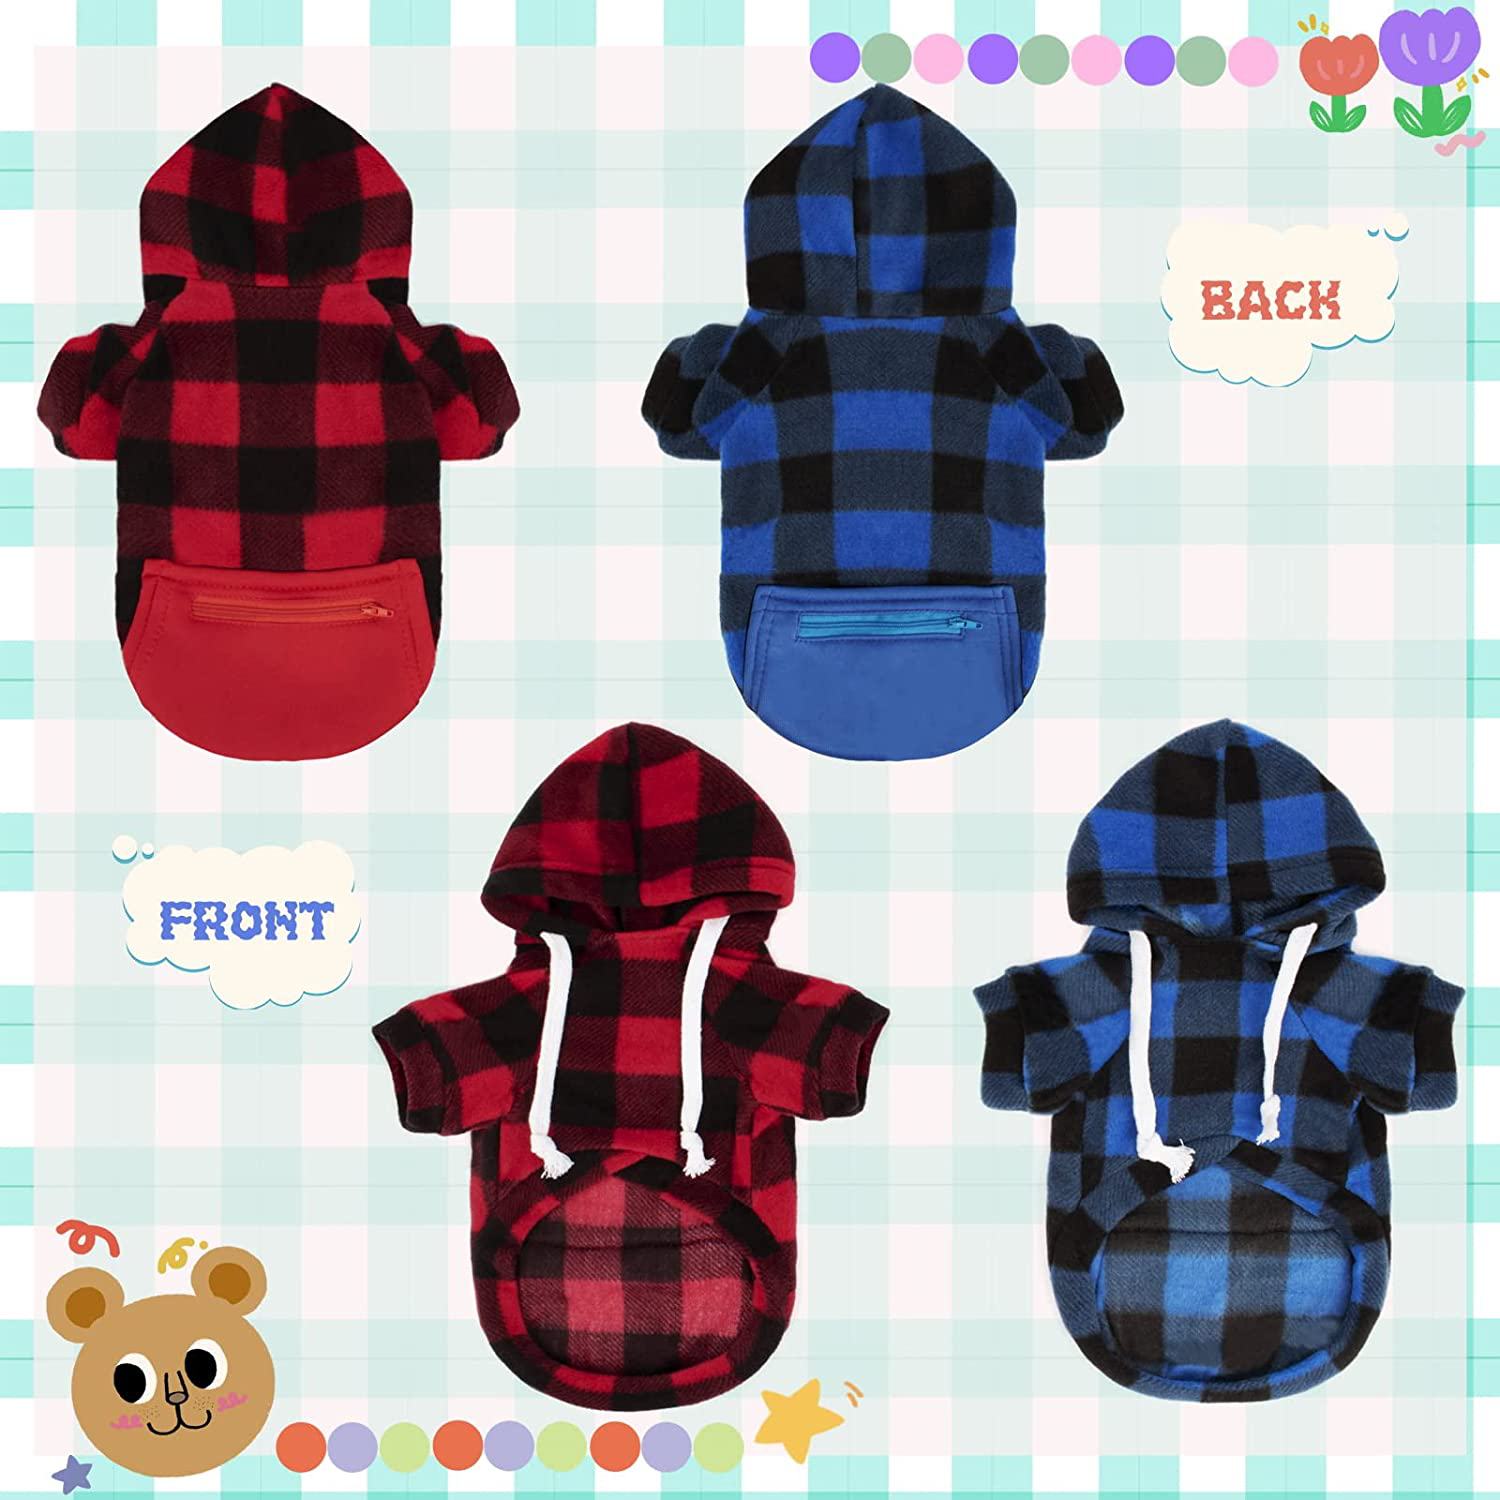 Rypet 2 Packs Plaid Dog Hoodie Sweatshirt Sweater for Dogs Pet Clothes with Hat and Pocket Warm Puppy Sweater for Small Dogs Girl & Boy